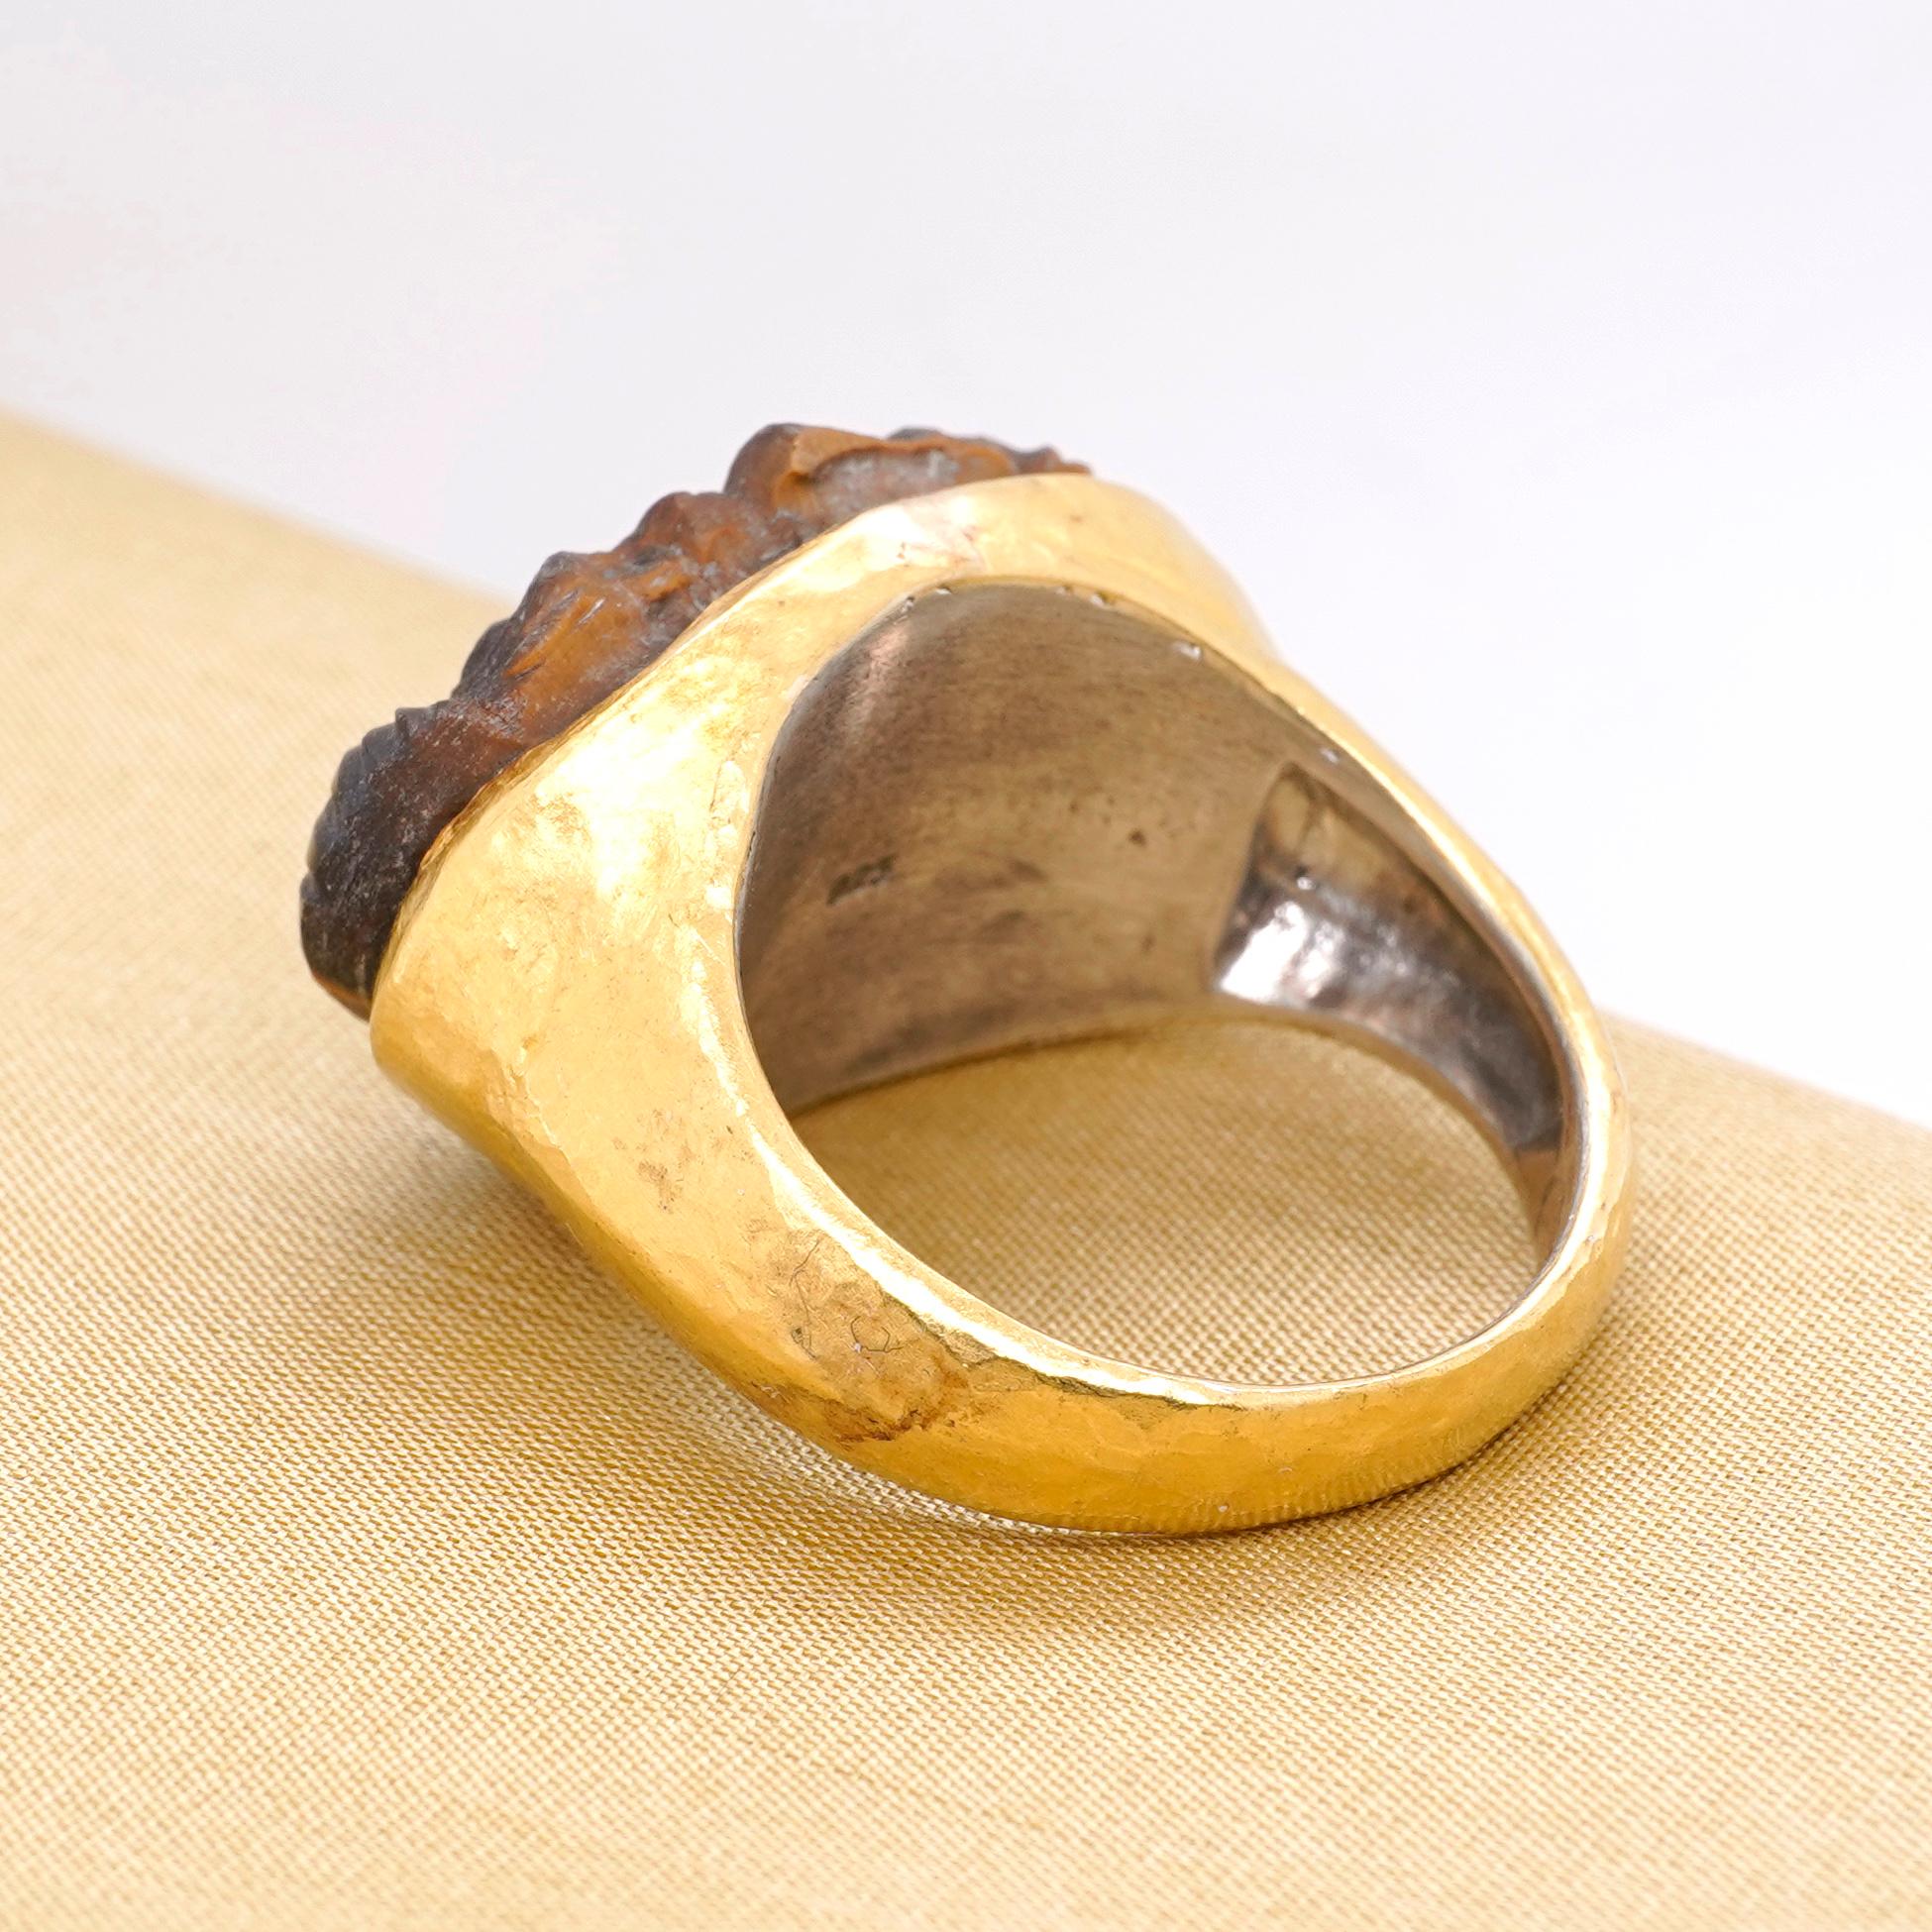 27 Carat Carved Zeus Face Tiger's Eye Statement Ring, 24k Yellow Gold & Sterling 1